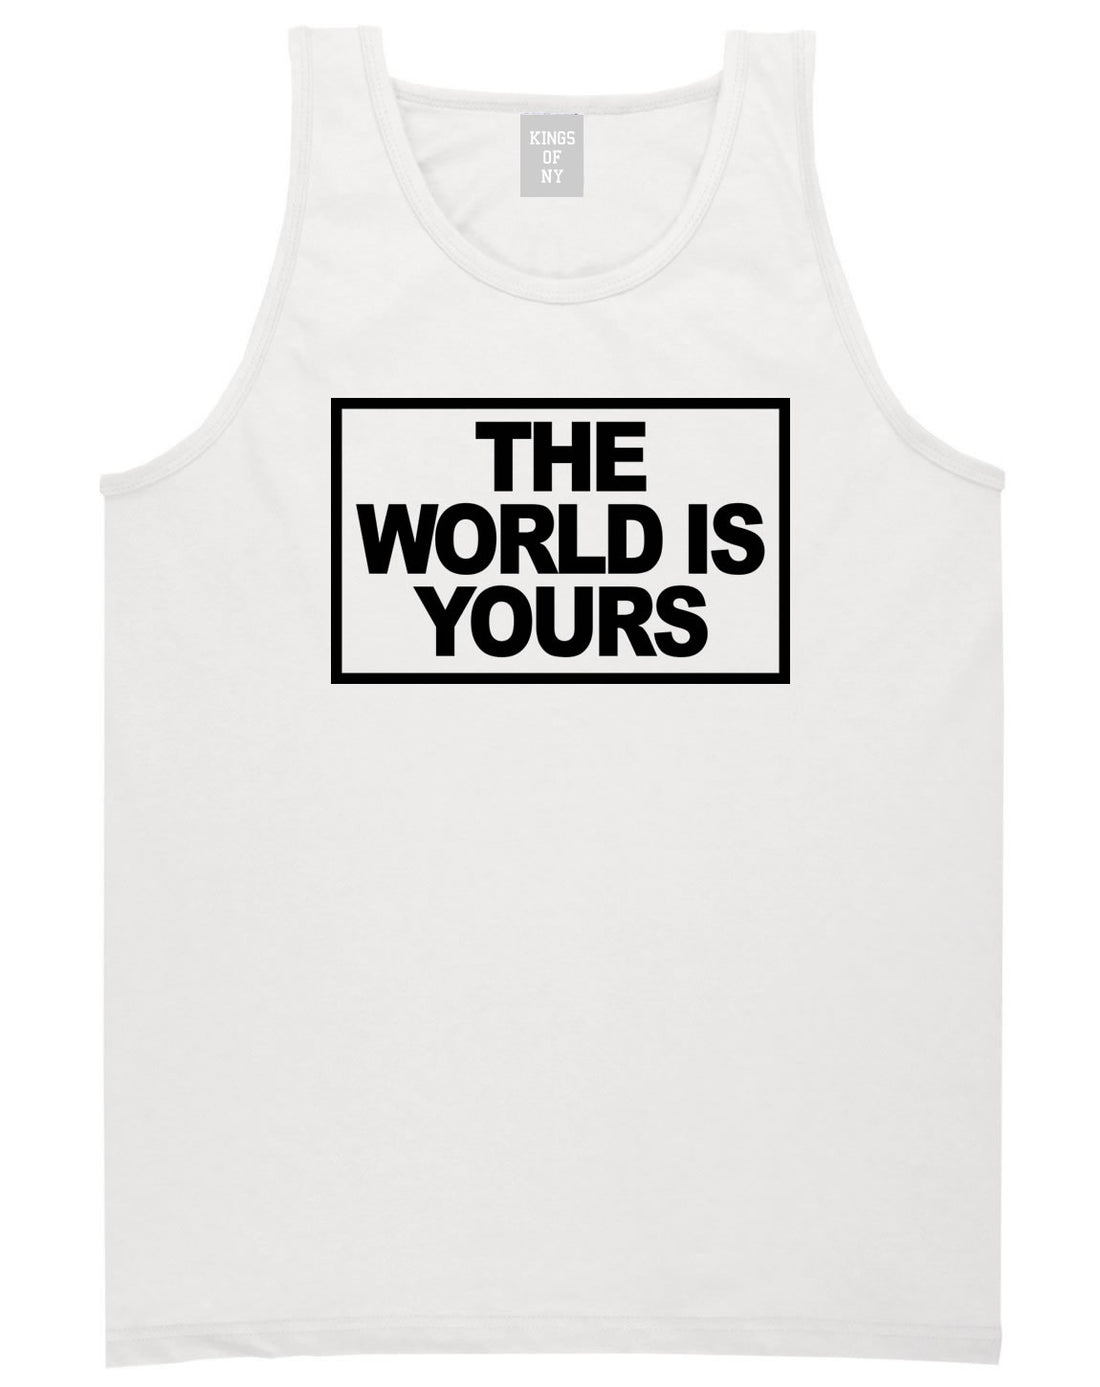 The World Is Yours Tank Top in White By Kings Of NY